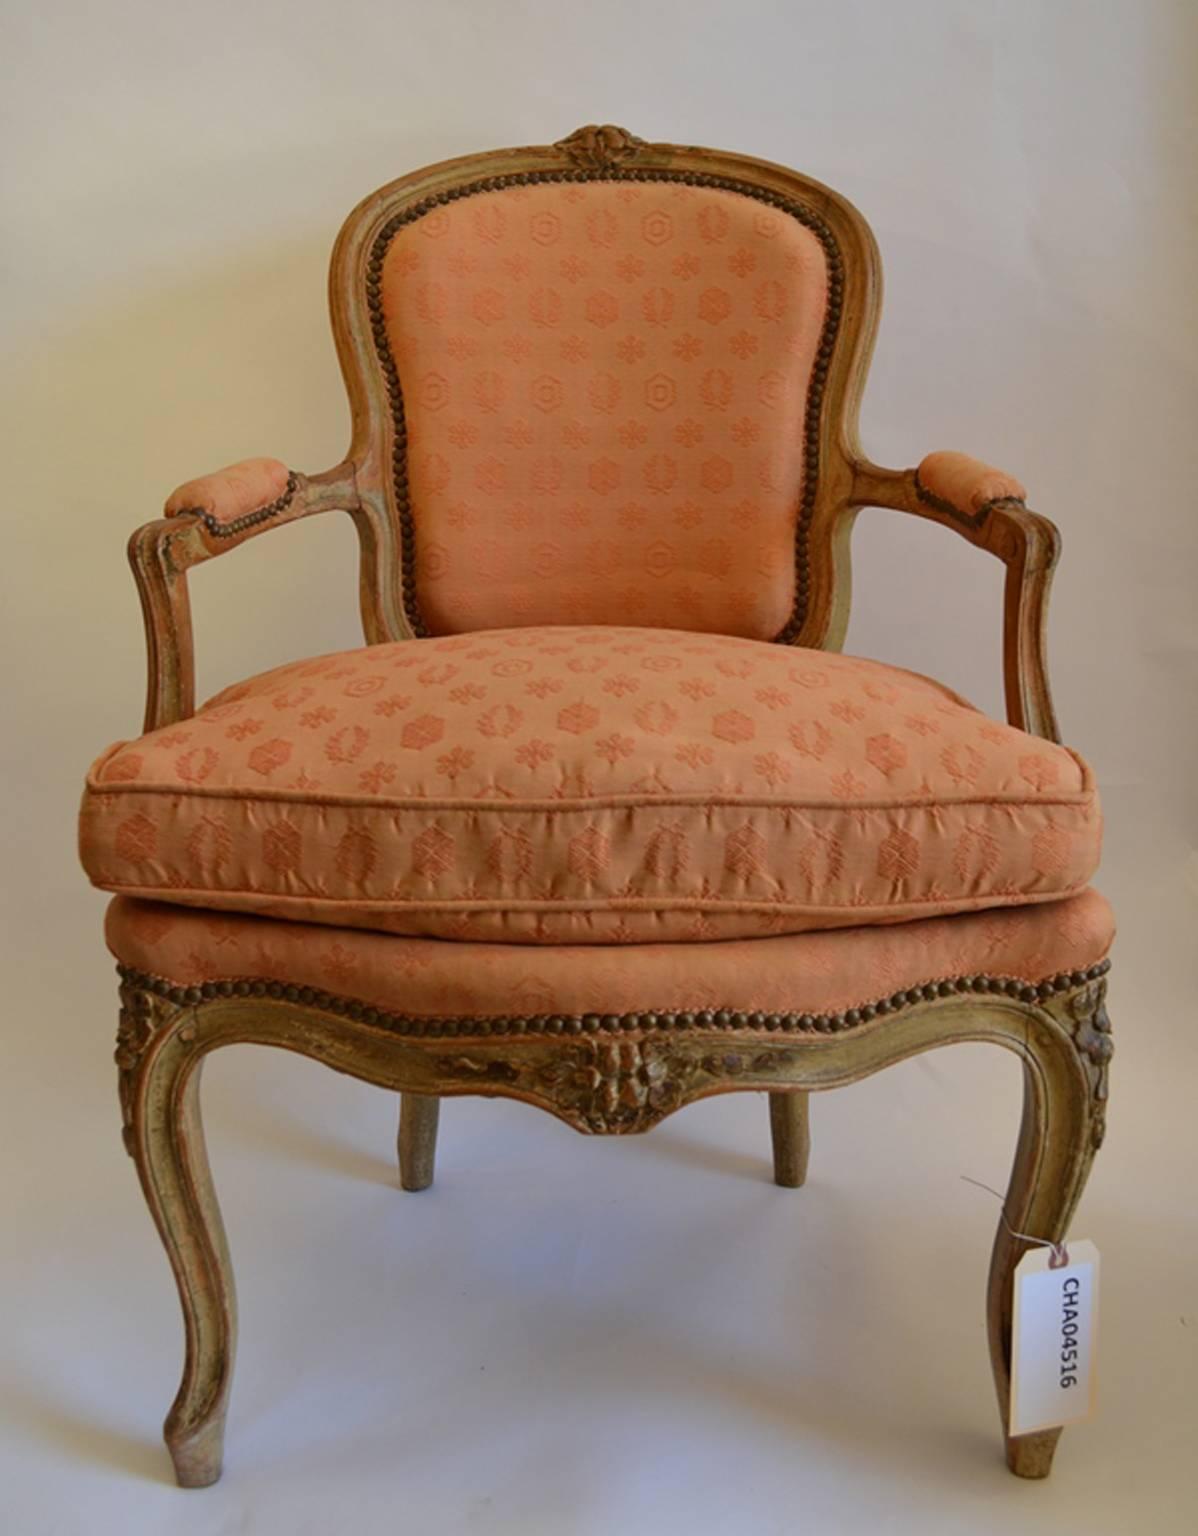 A pair of Louis XV carved and Crème Peinte Fauteuils, 18th century, rounded floral crests, padded arms, serpentine seat rail, floral cabriole legs. Upholstered in a period Salmon colored Damask.